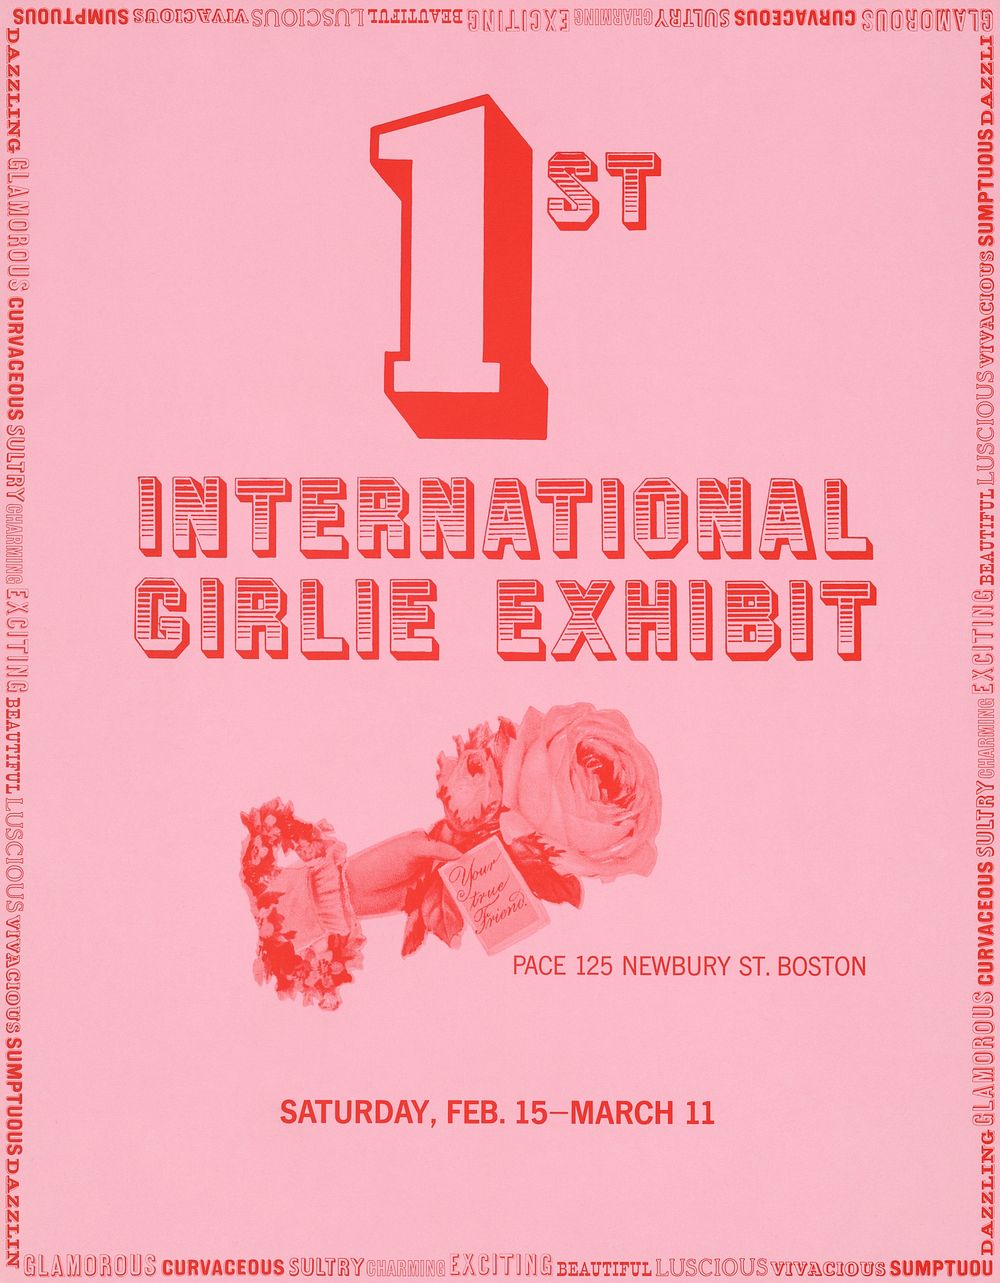 1st international girlie exhibit (1964) pink poster by Pace Gallery. Original public domain image from the Library of…